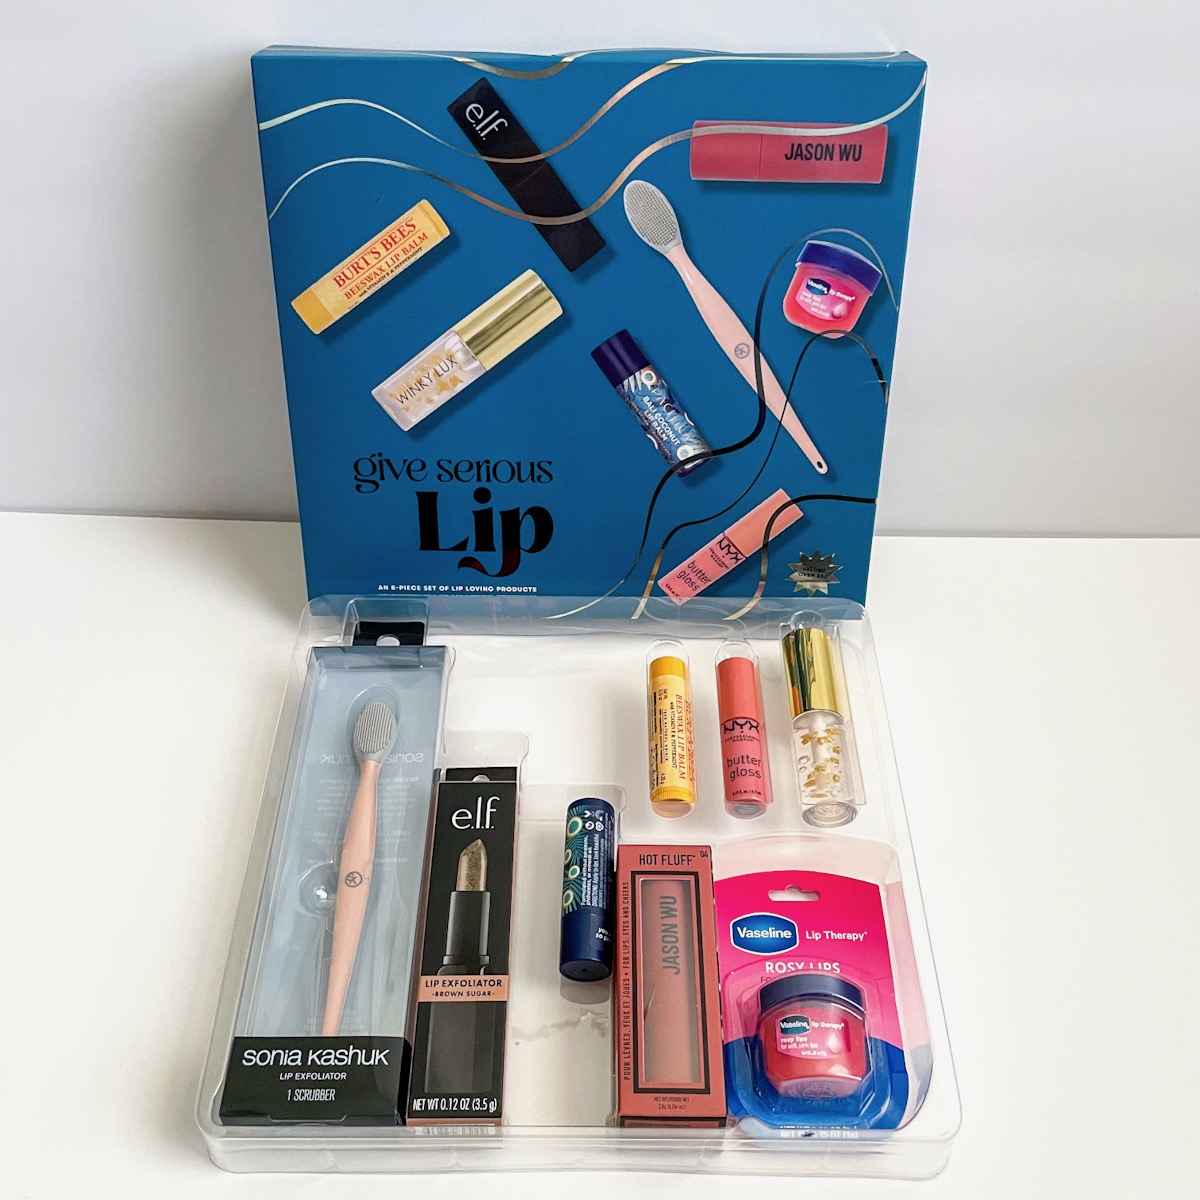 lip products in clear plastic liner next to blue box